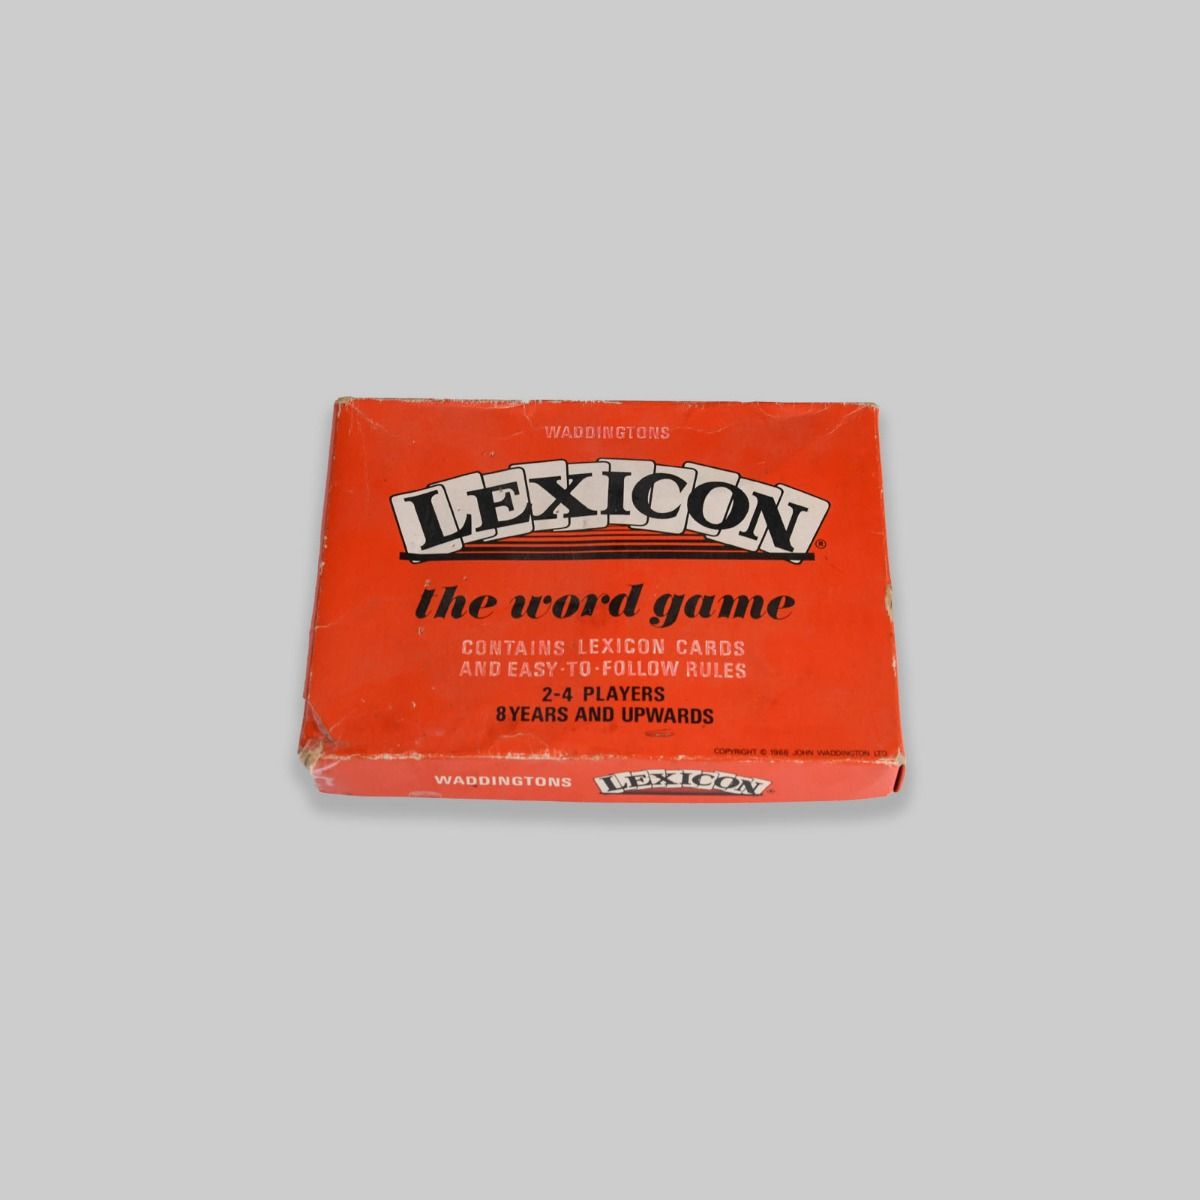 'Lexicon - The Word Game' 1968 Card Game